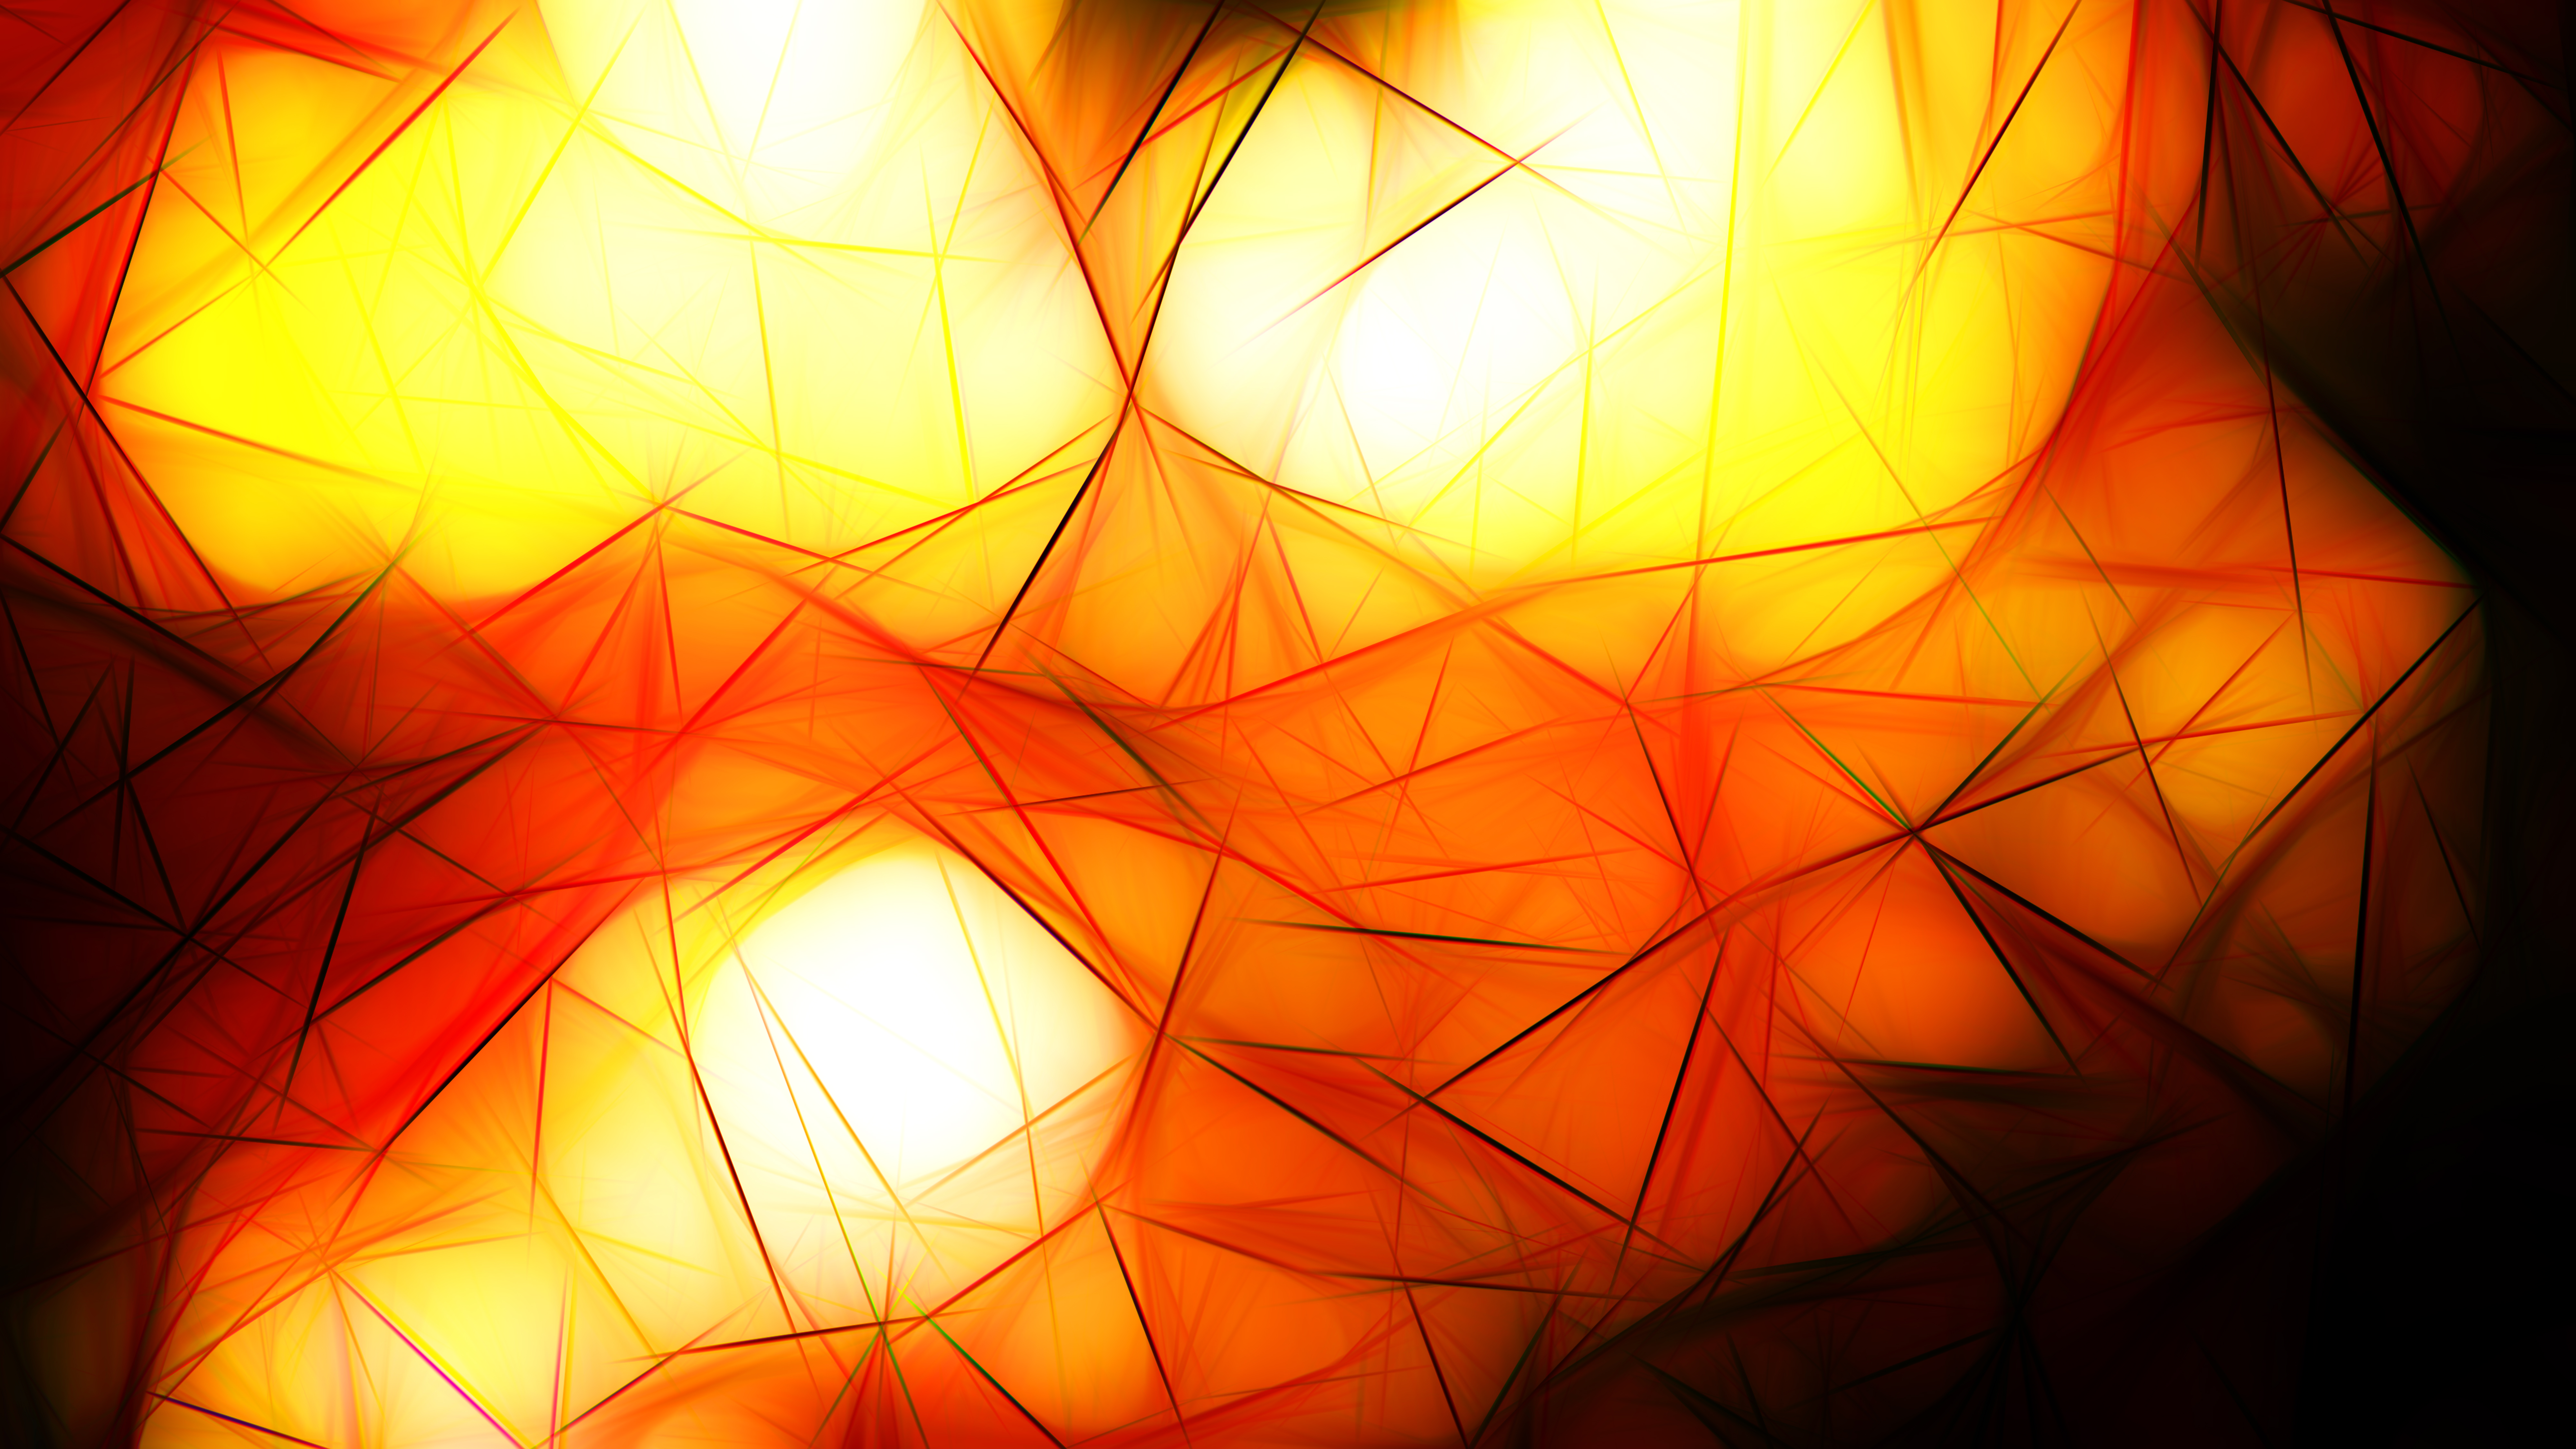 Abstract Red White And Yellow Fractal Wallpaper - HD Wallpaper 